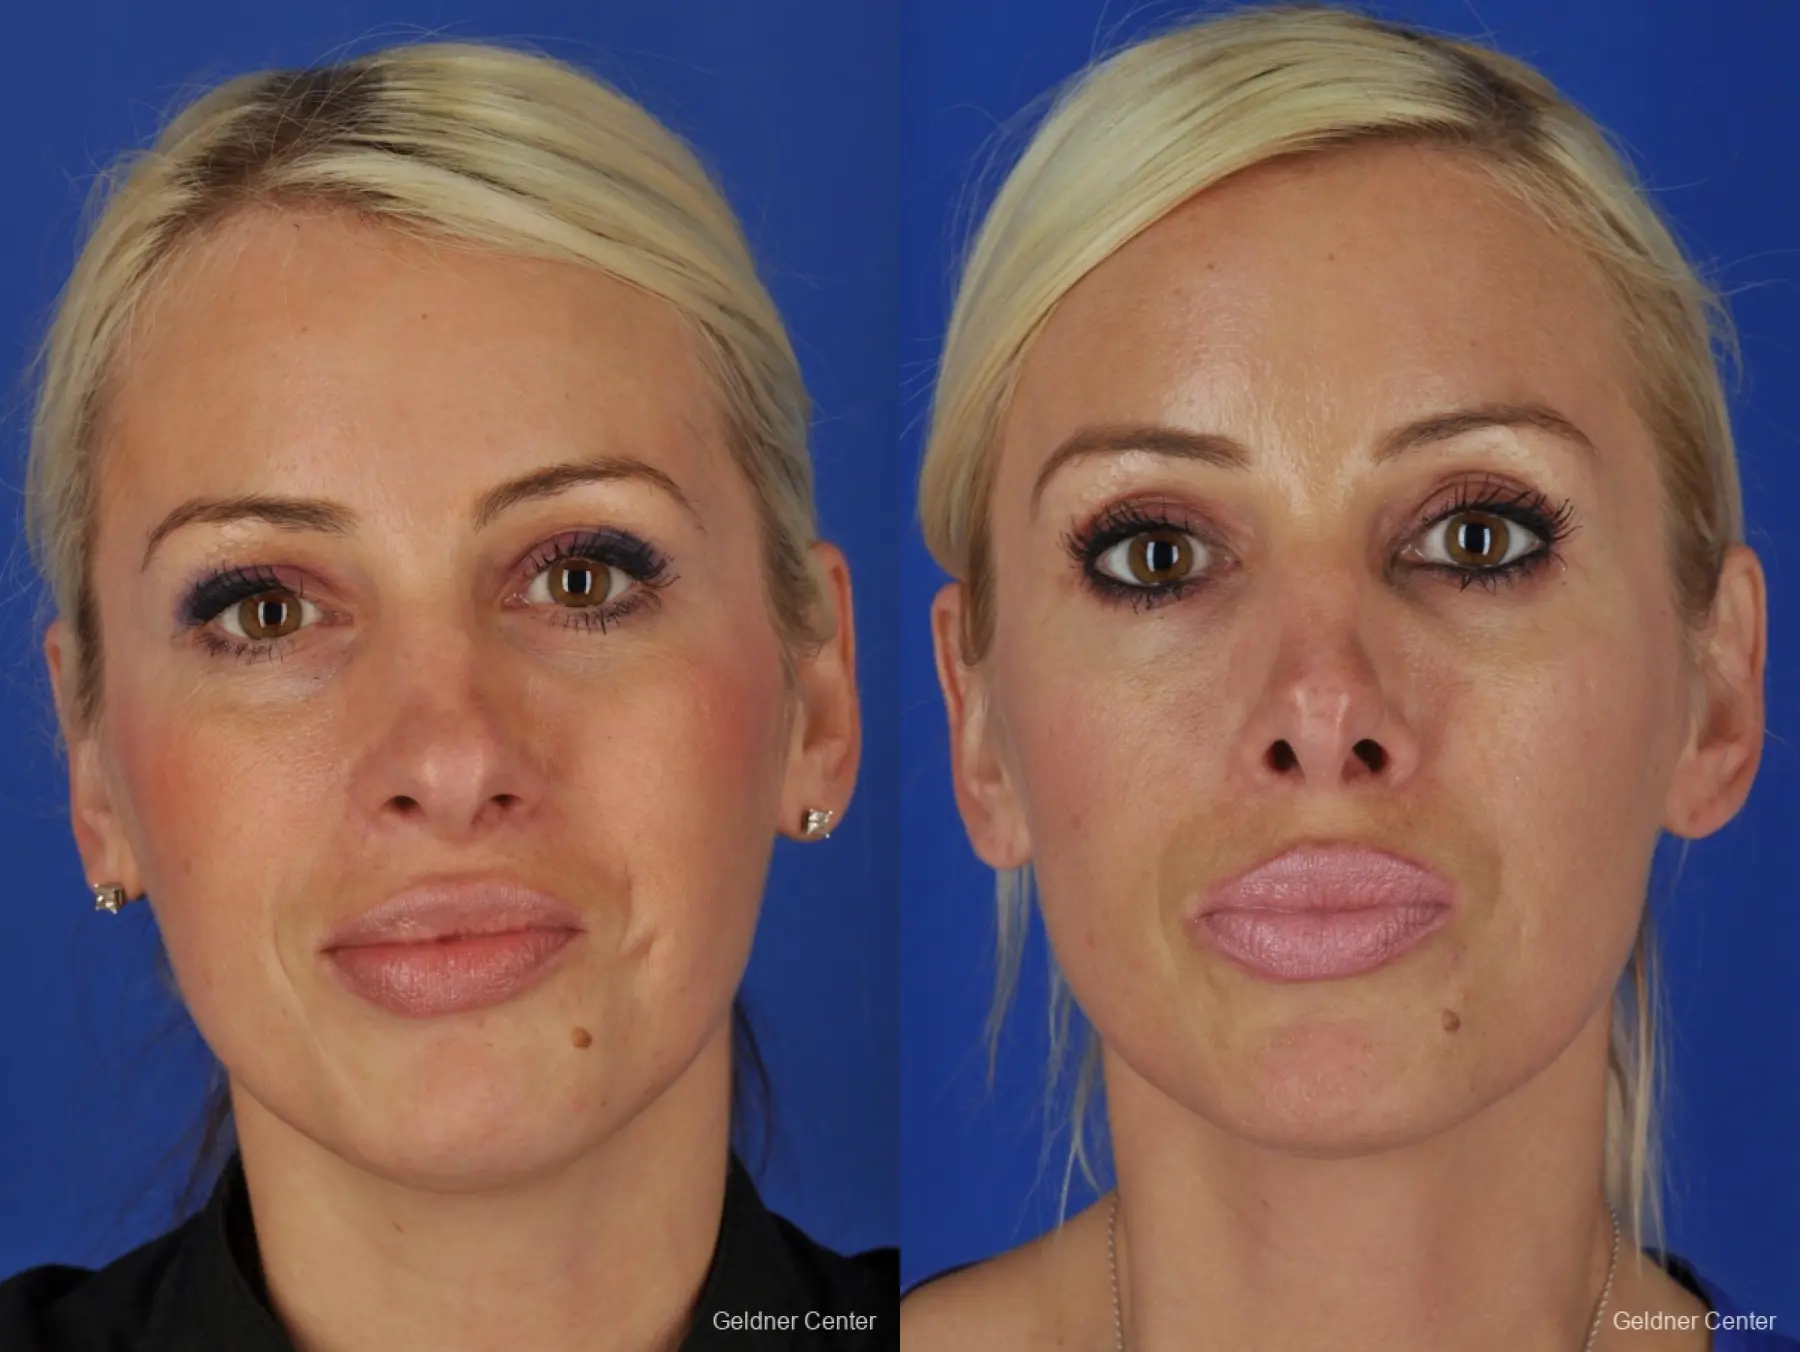 Chicago Rhinoplasty - Before and After 1